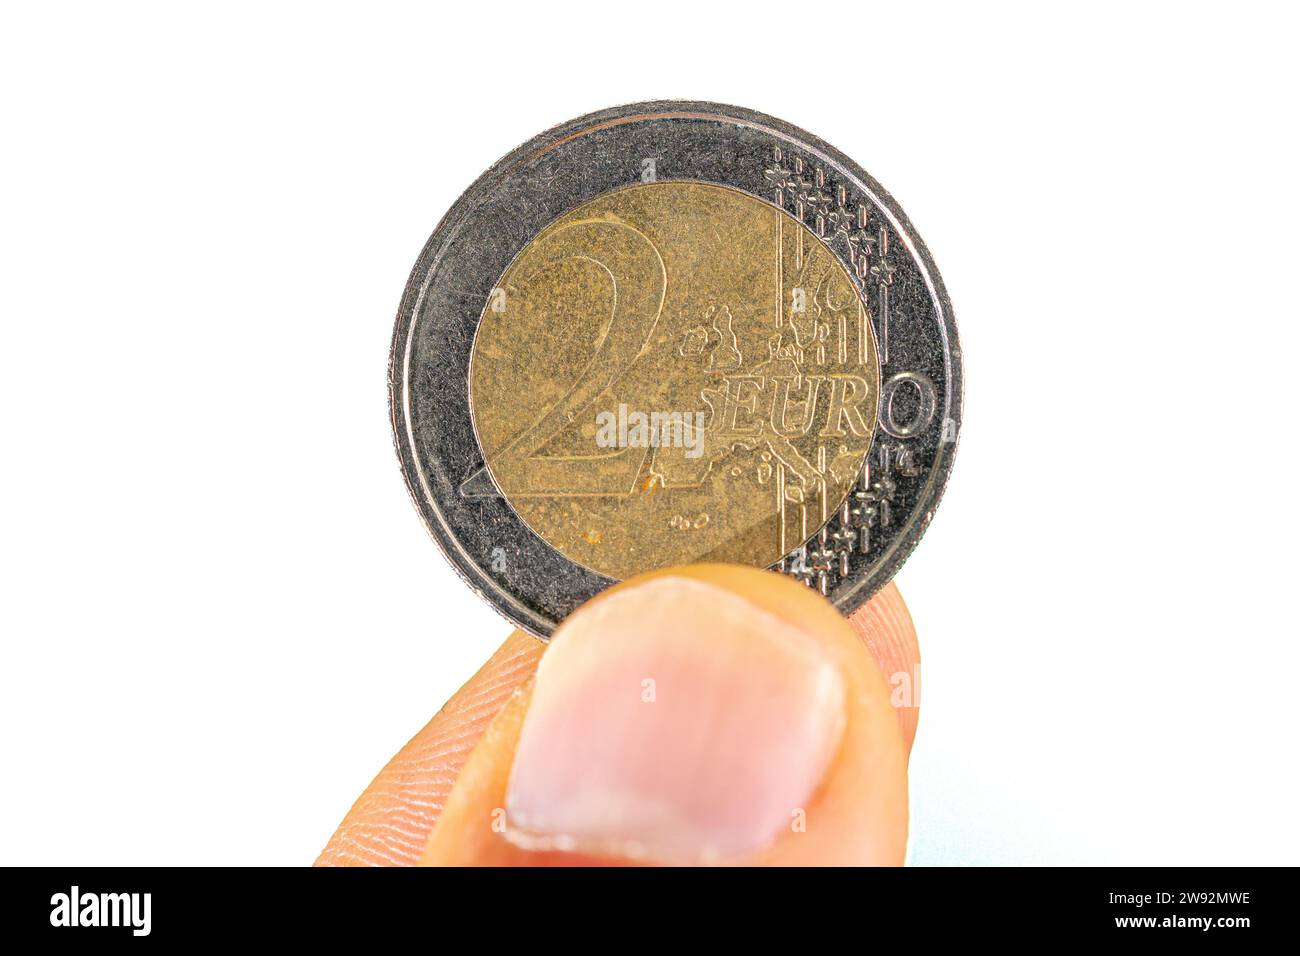 2 euro coin face held between thumb and index finger Stock Photo